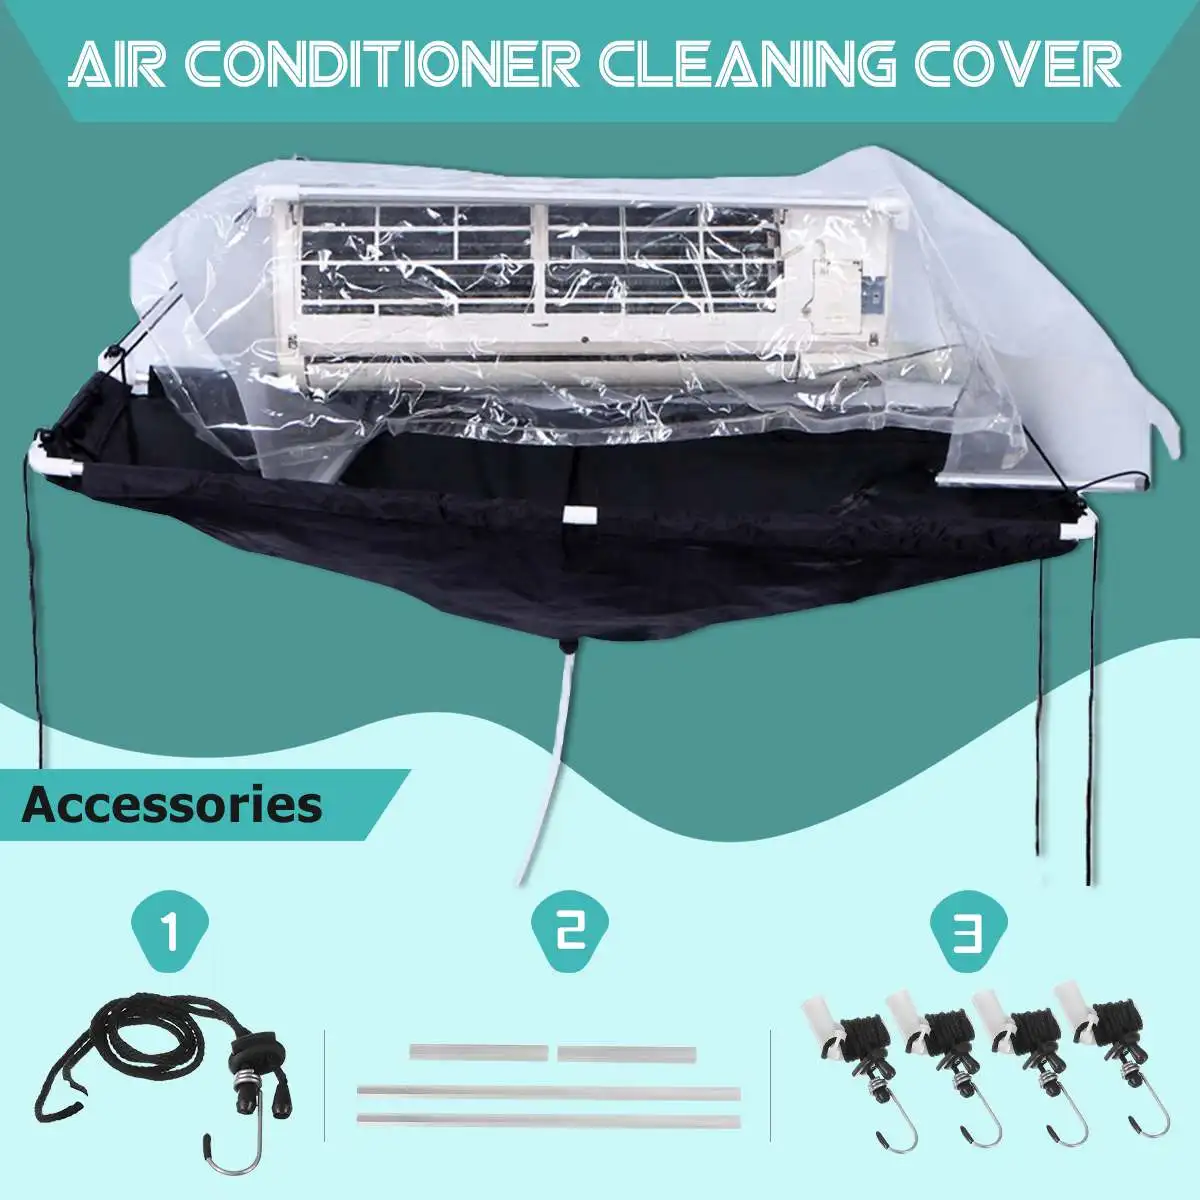 Home Air Conditioner Cleaning PU Cover Waterproof Dustproof Cover Cleaner 